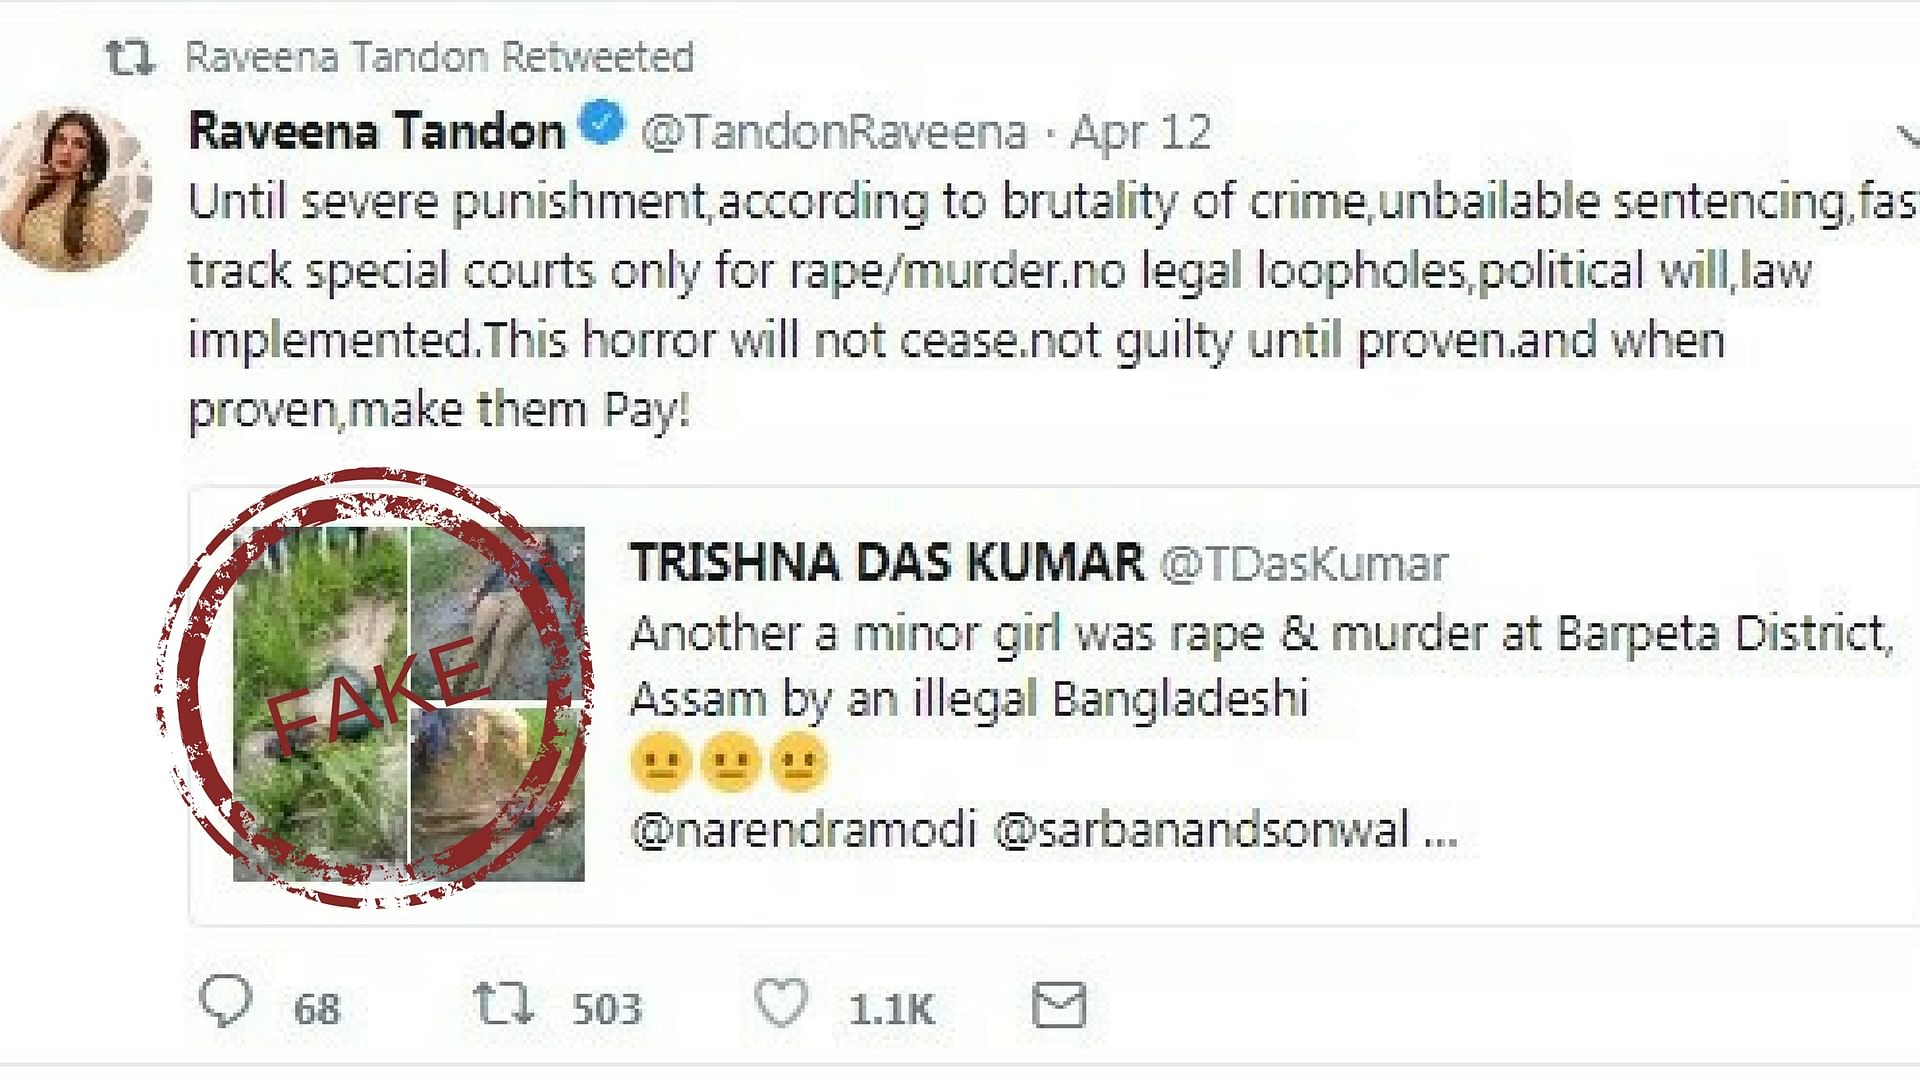 BOOM contacted local police in Assam and Bihar and found troubling inaccuracies in at least two viral posts on social media.